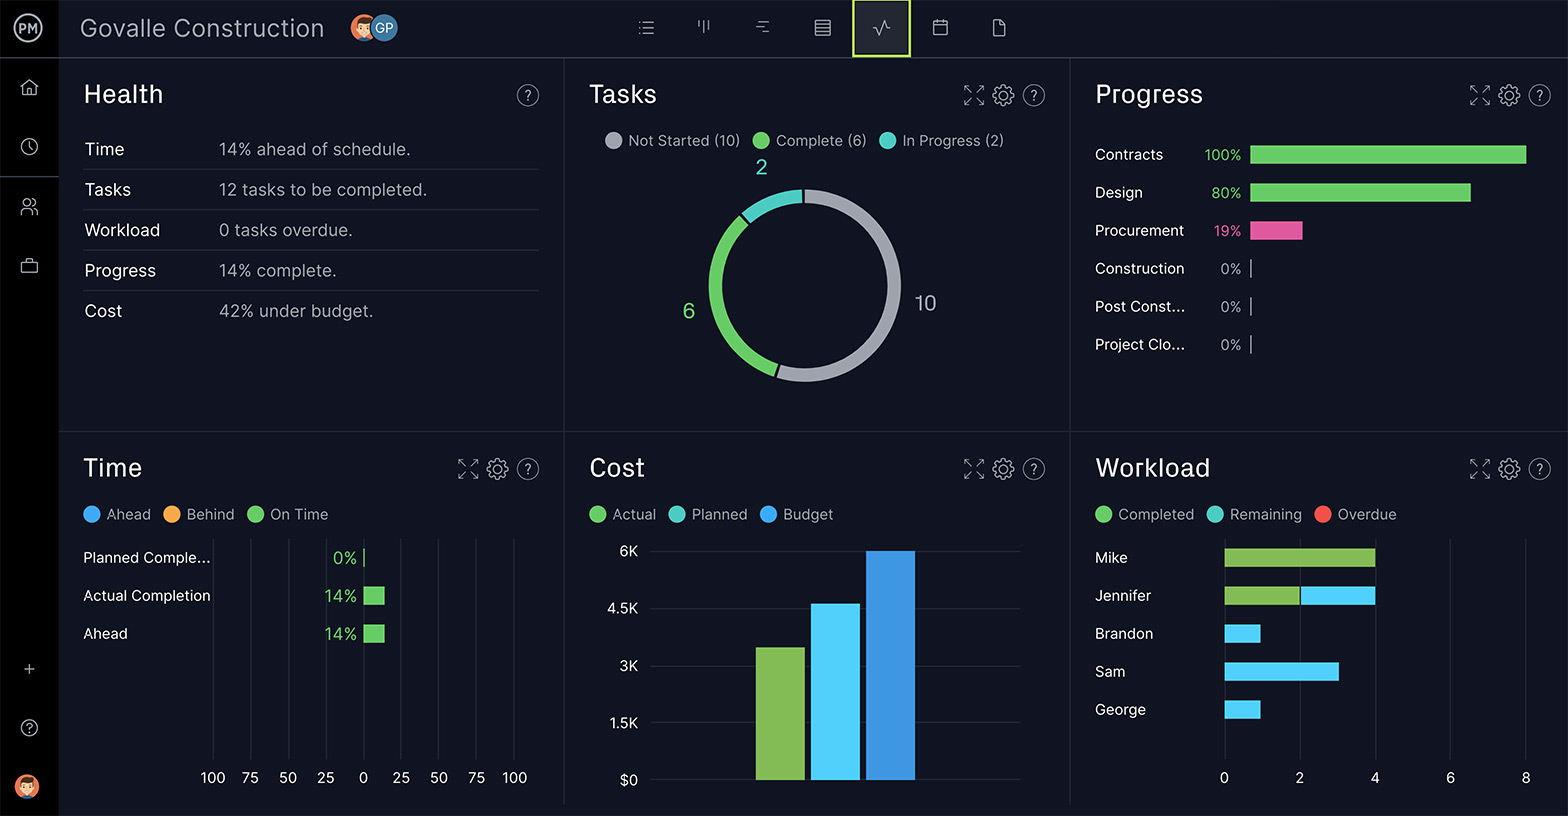 ProjectManager’s dashboard is ideal for tracking professional services projects